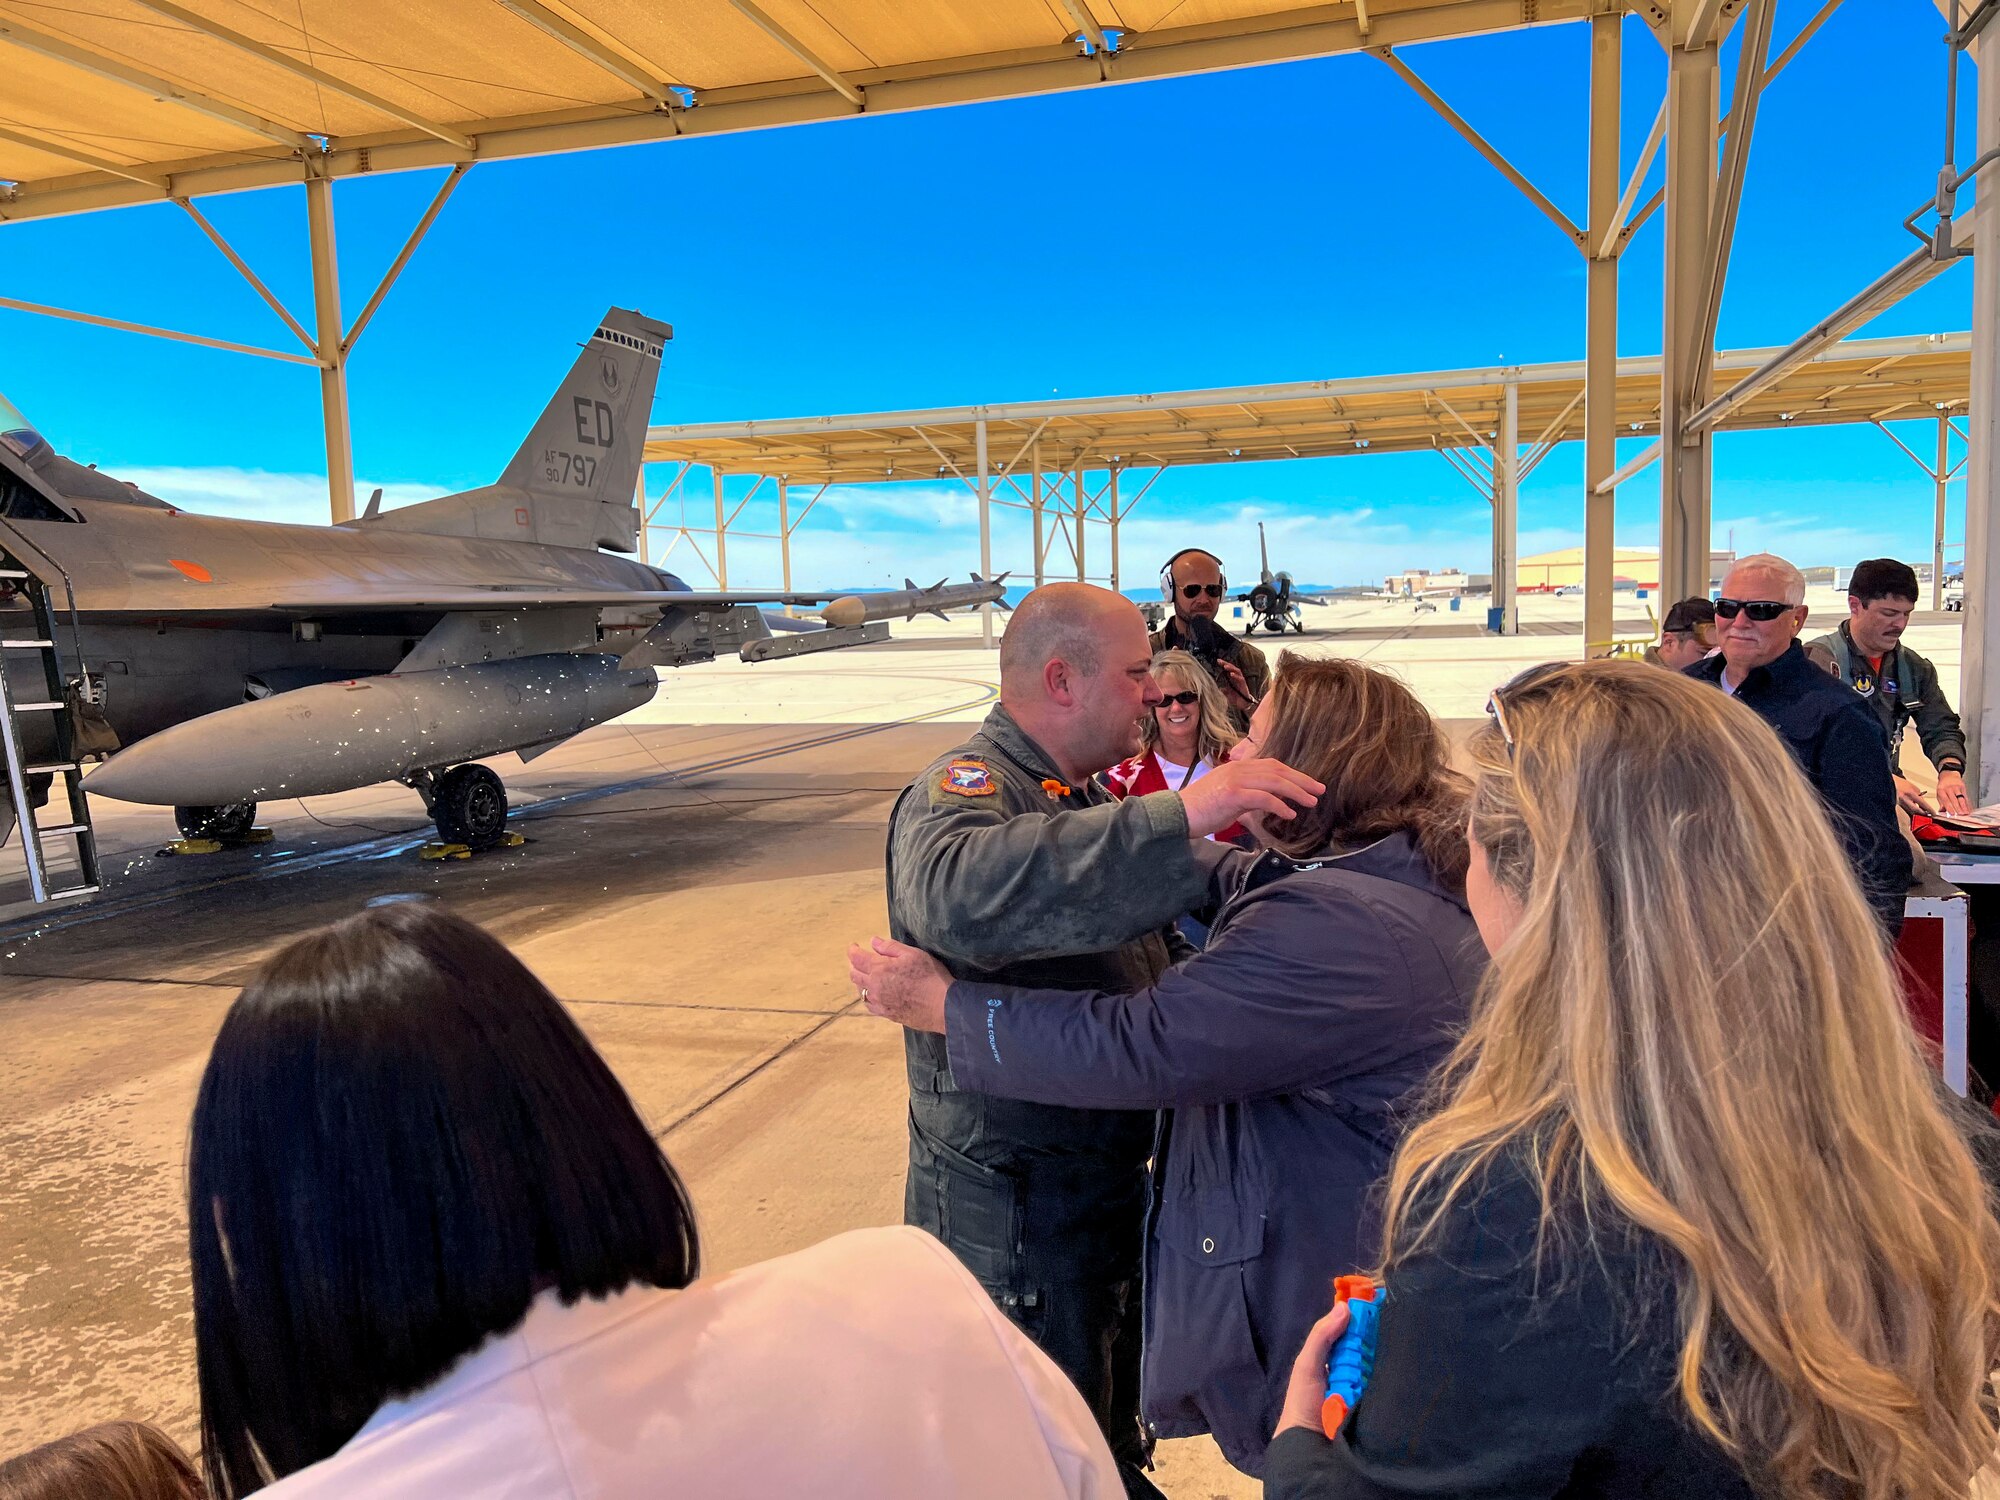 Lt. Col. Matthew Taranto, Chief Aerospace Physiologist, U.S. Air Force Test Pilot School greets his family after conducting his "fini-flight" before retirement March 31st. (Photo courtesy of Staff Sgt. Elizabeth Taranto)